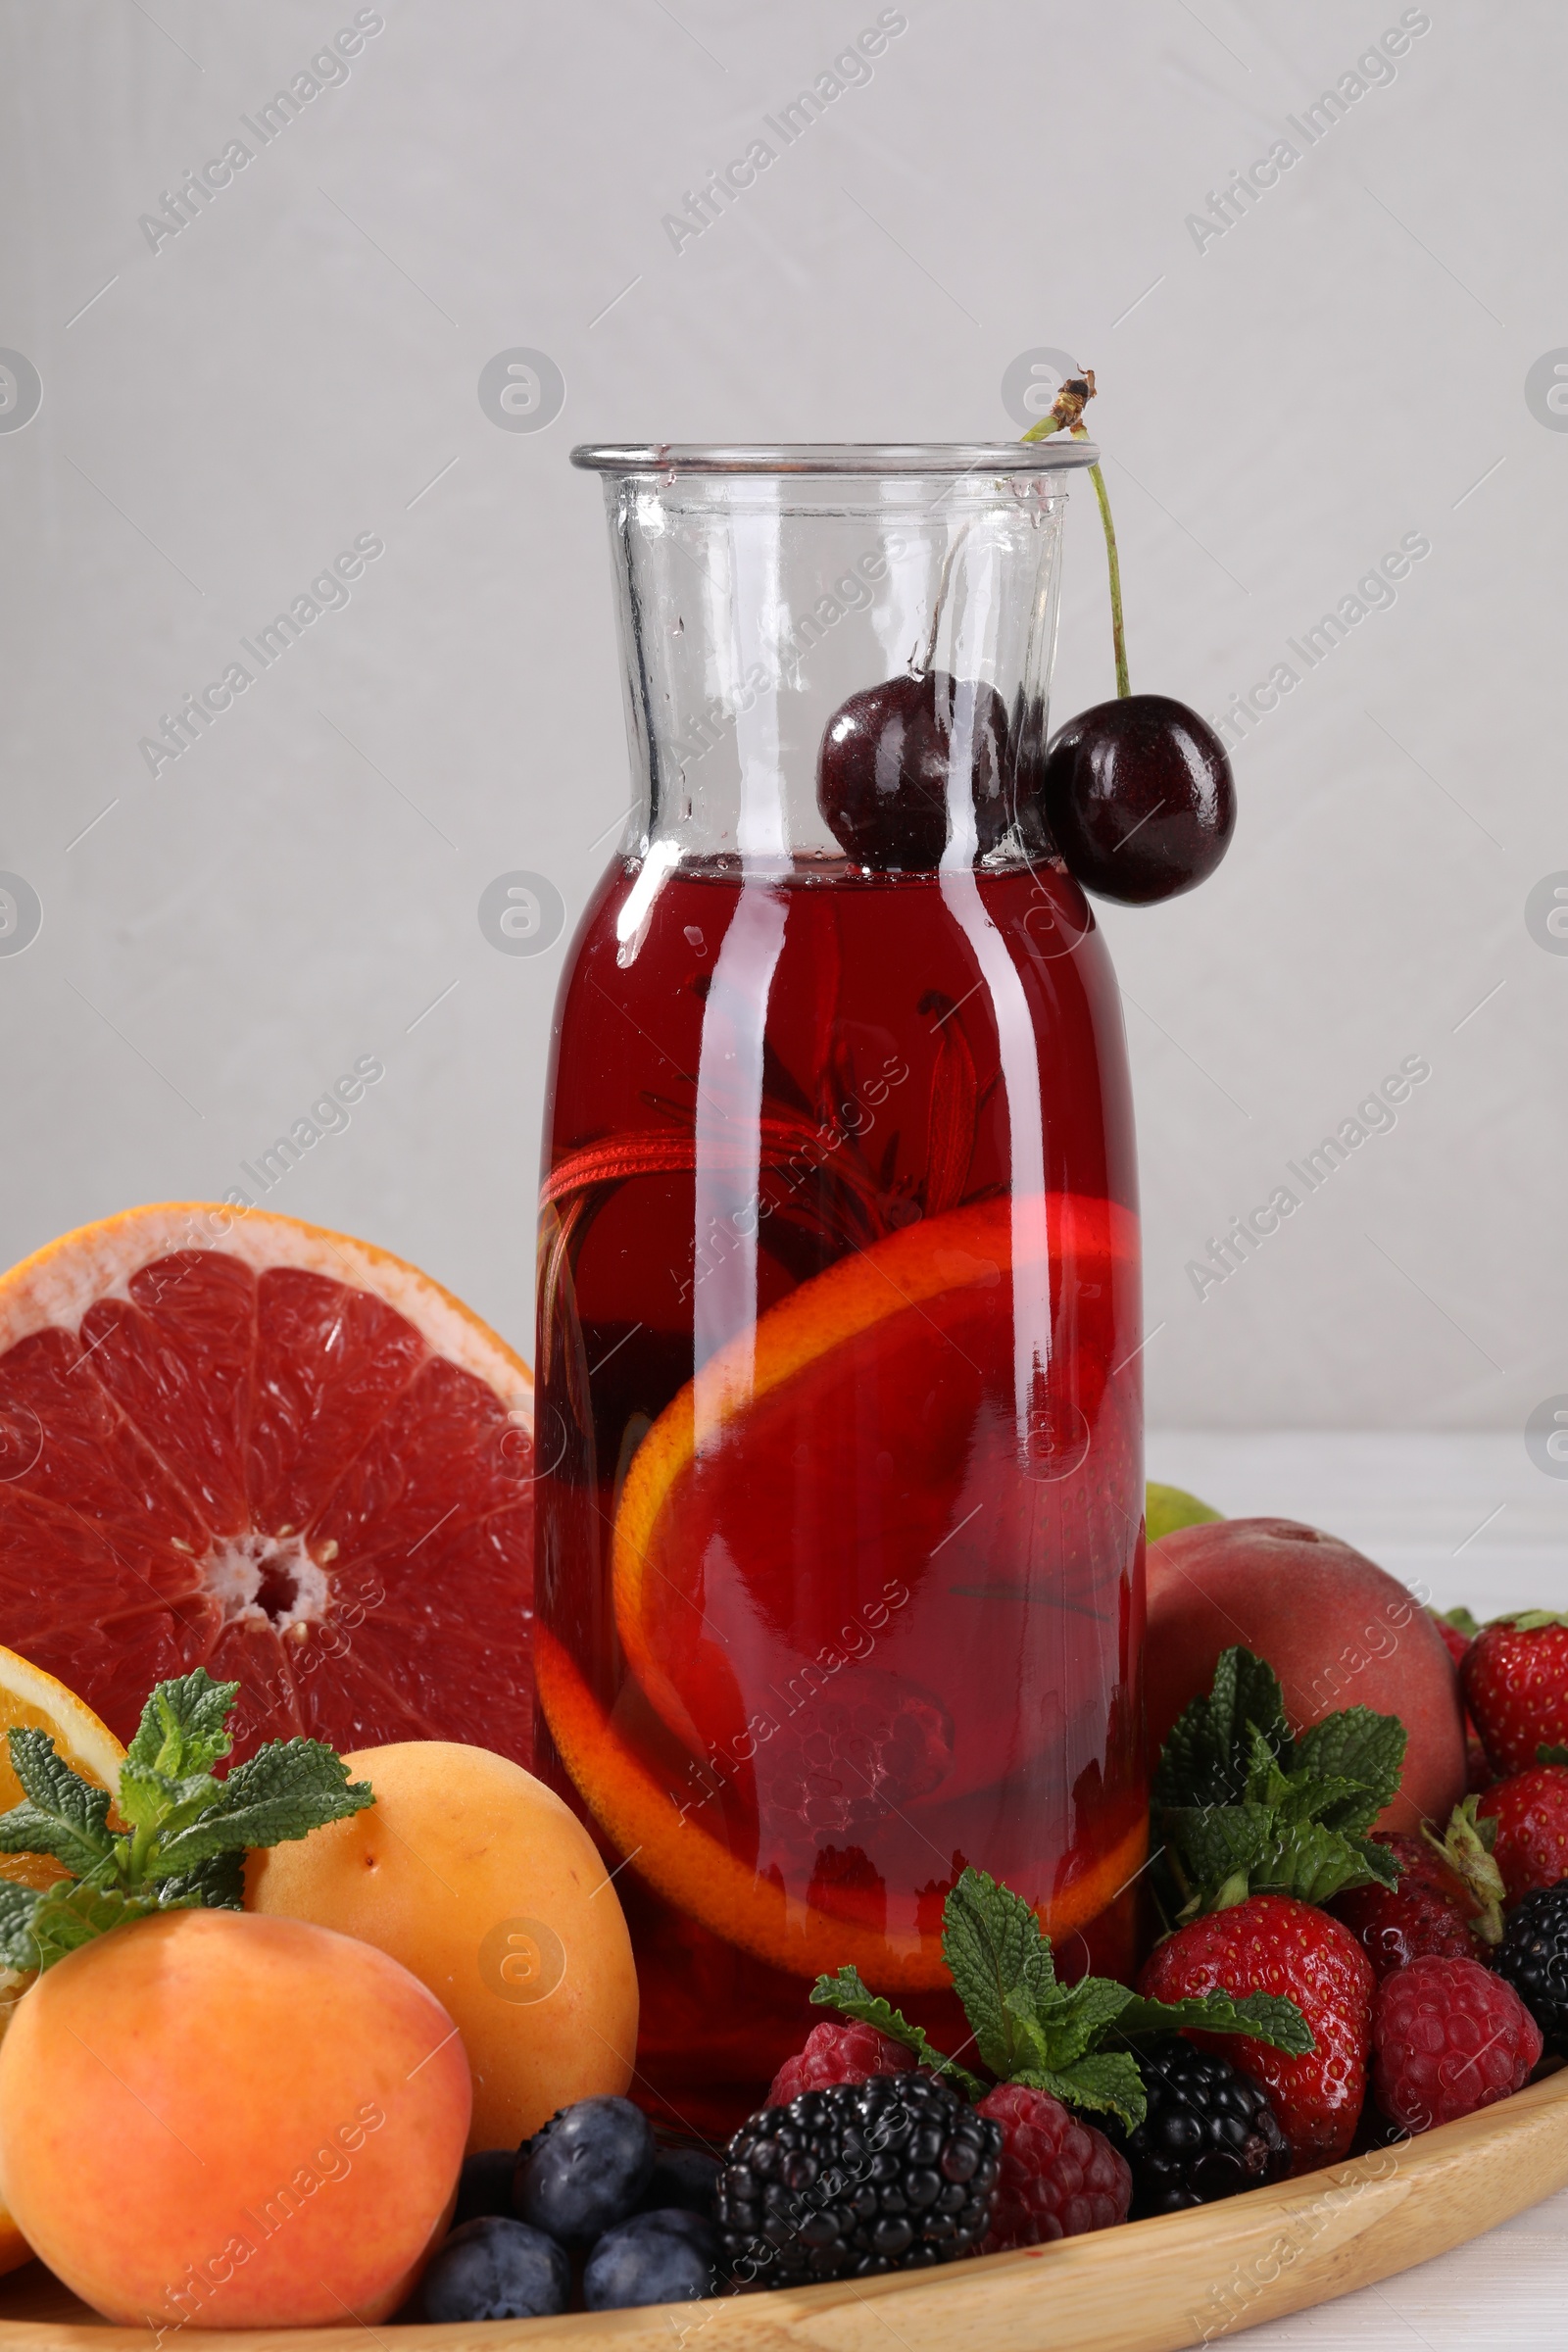 Photo of Delicious refreshing sangria, fruits and berries on table